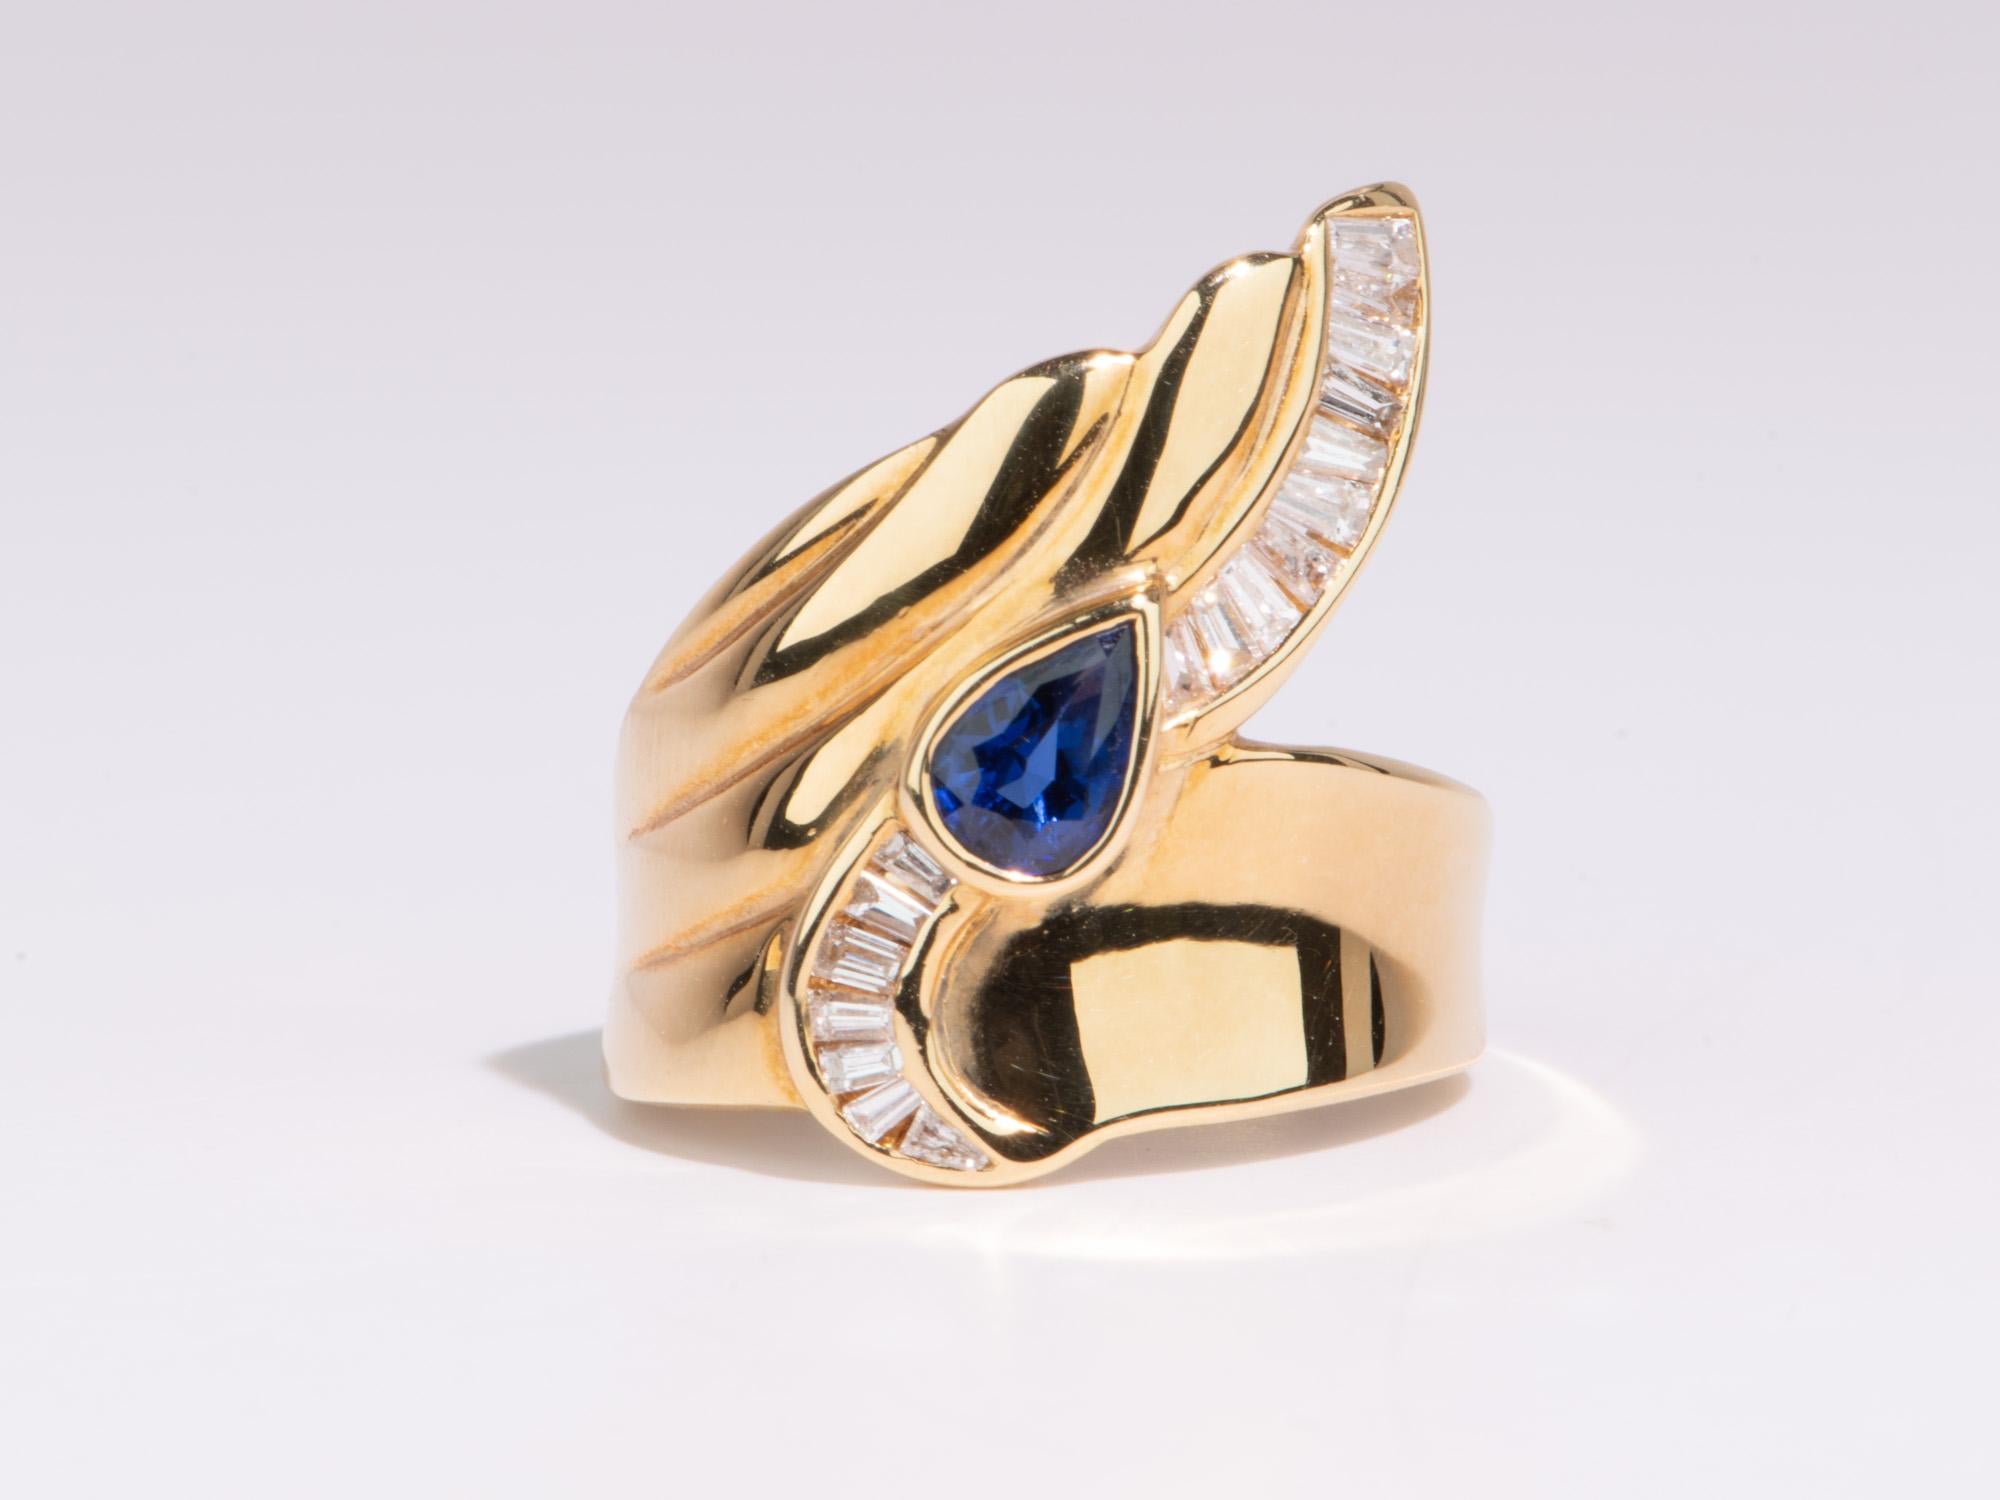 This gorgeous Wing Tip Ring is an exquisite representation of your personal style. The unique flowing design is beautifully complemented by the vivid blue sapphire. Crafted from 18K gold, it weighs 10.7g and is sure to add an elegant touch to any